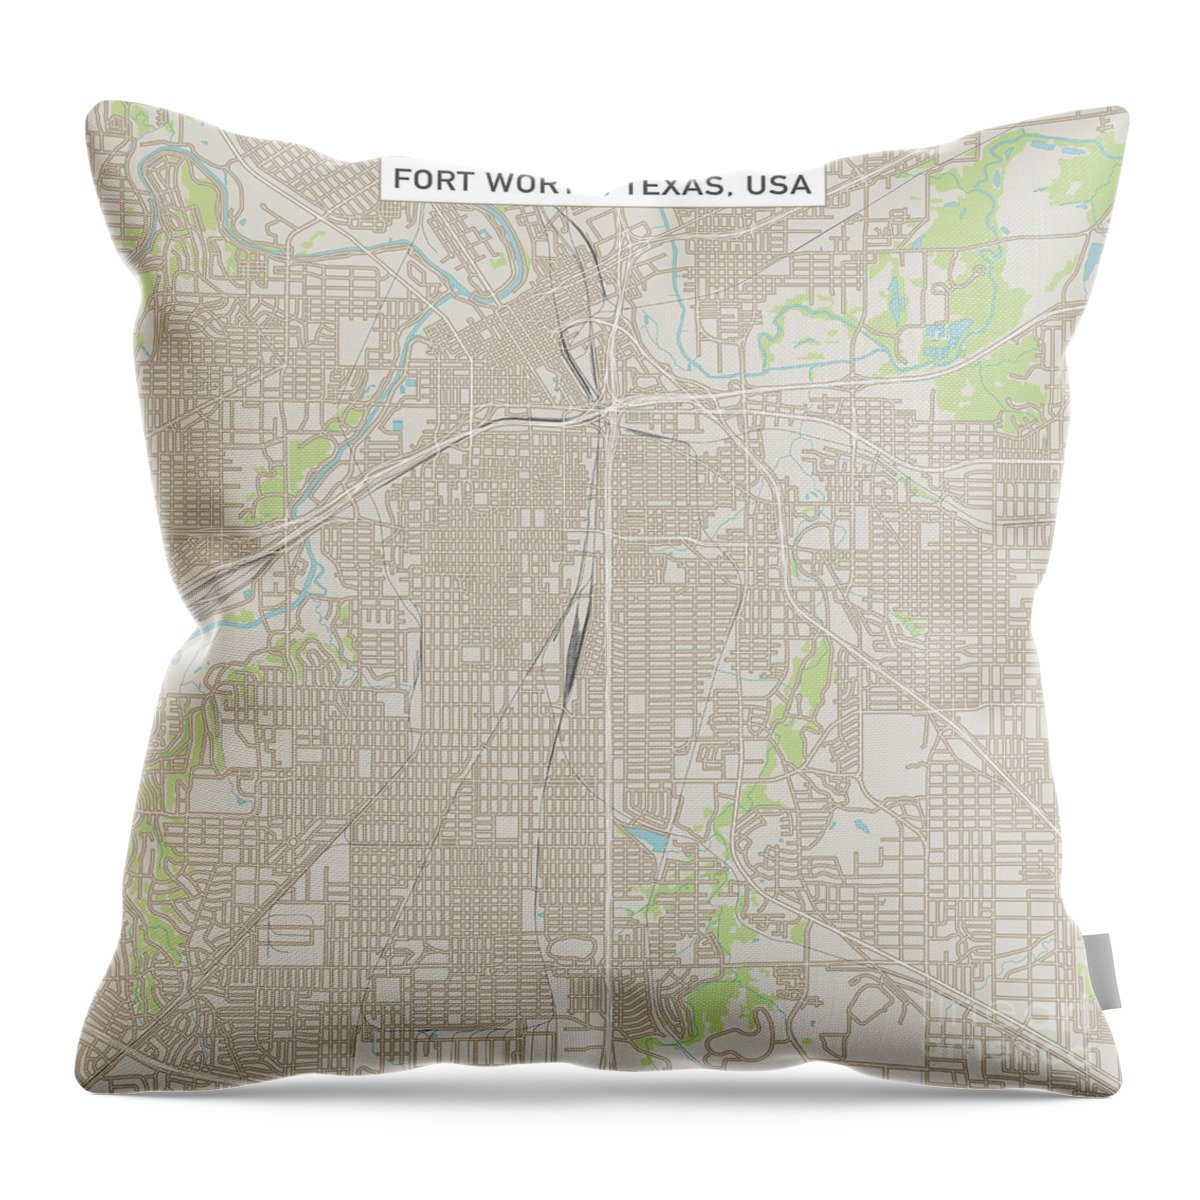 Fort Worth Throw Pillow featuring the digital art Fort Worth Texas US City Street Map by Frank Ramspott